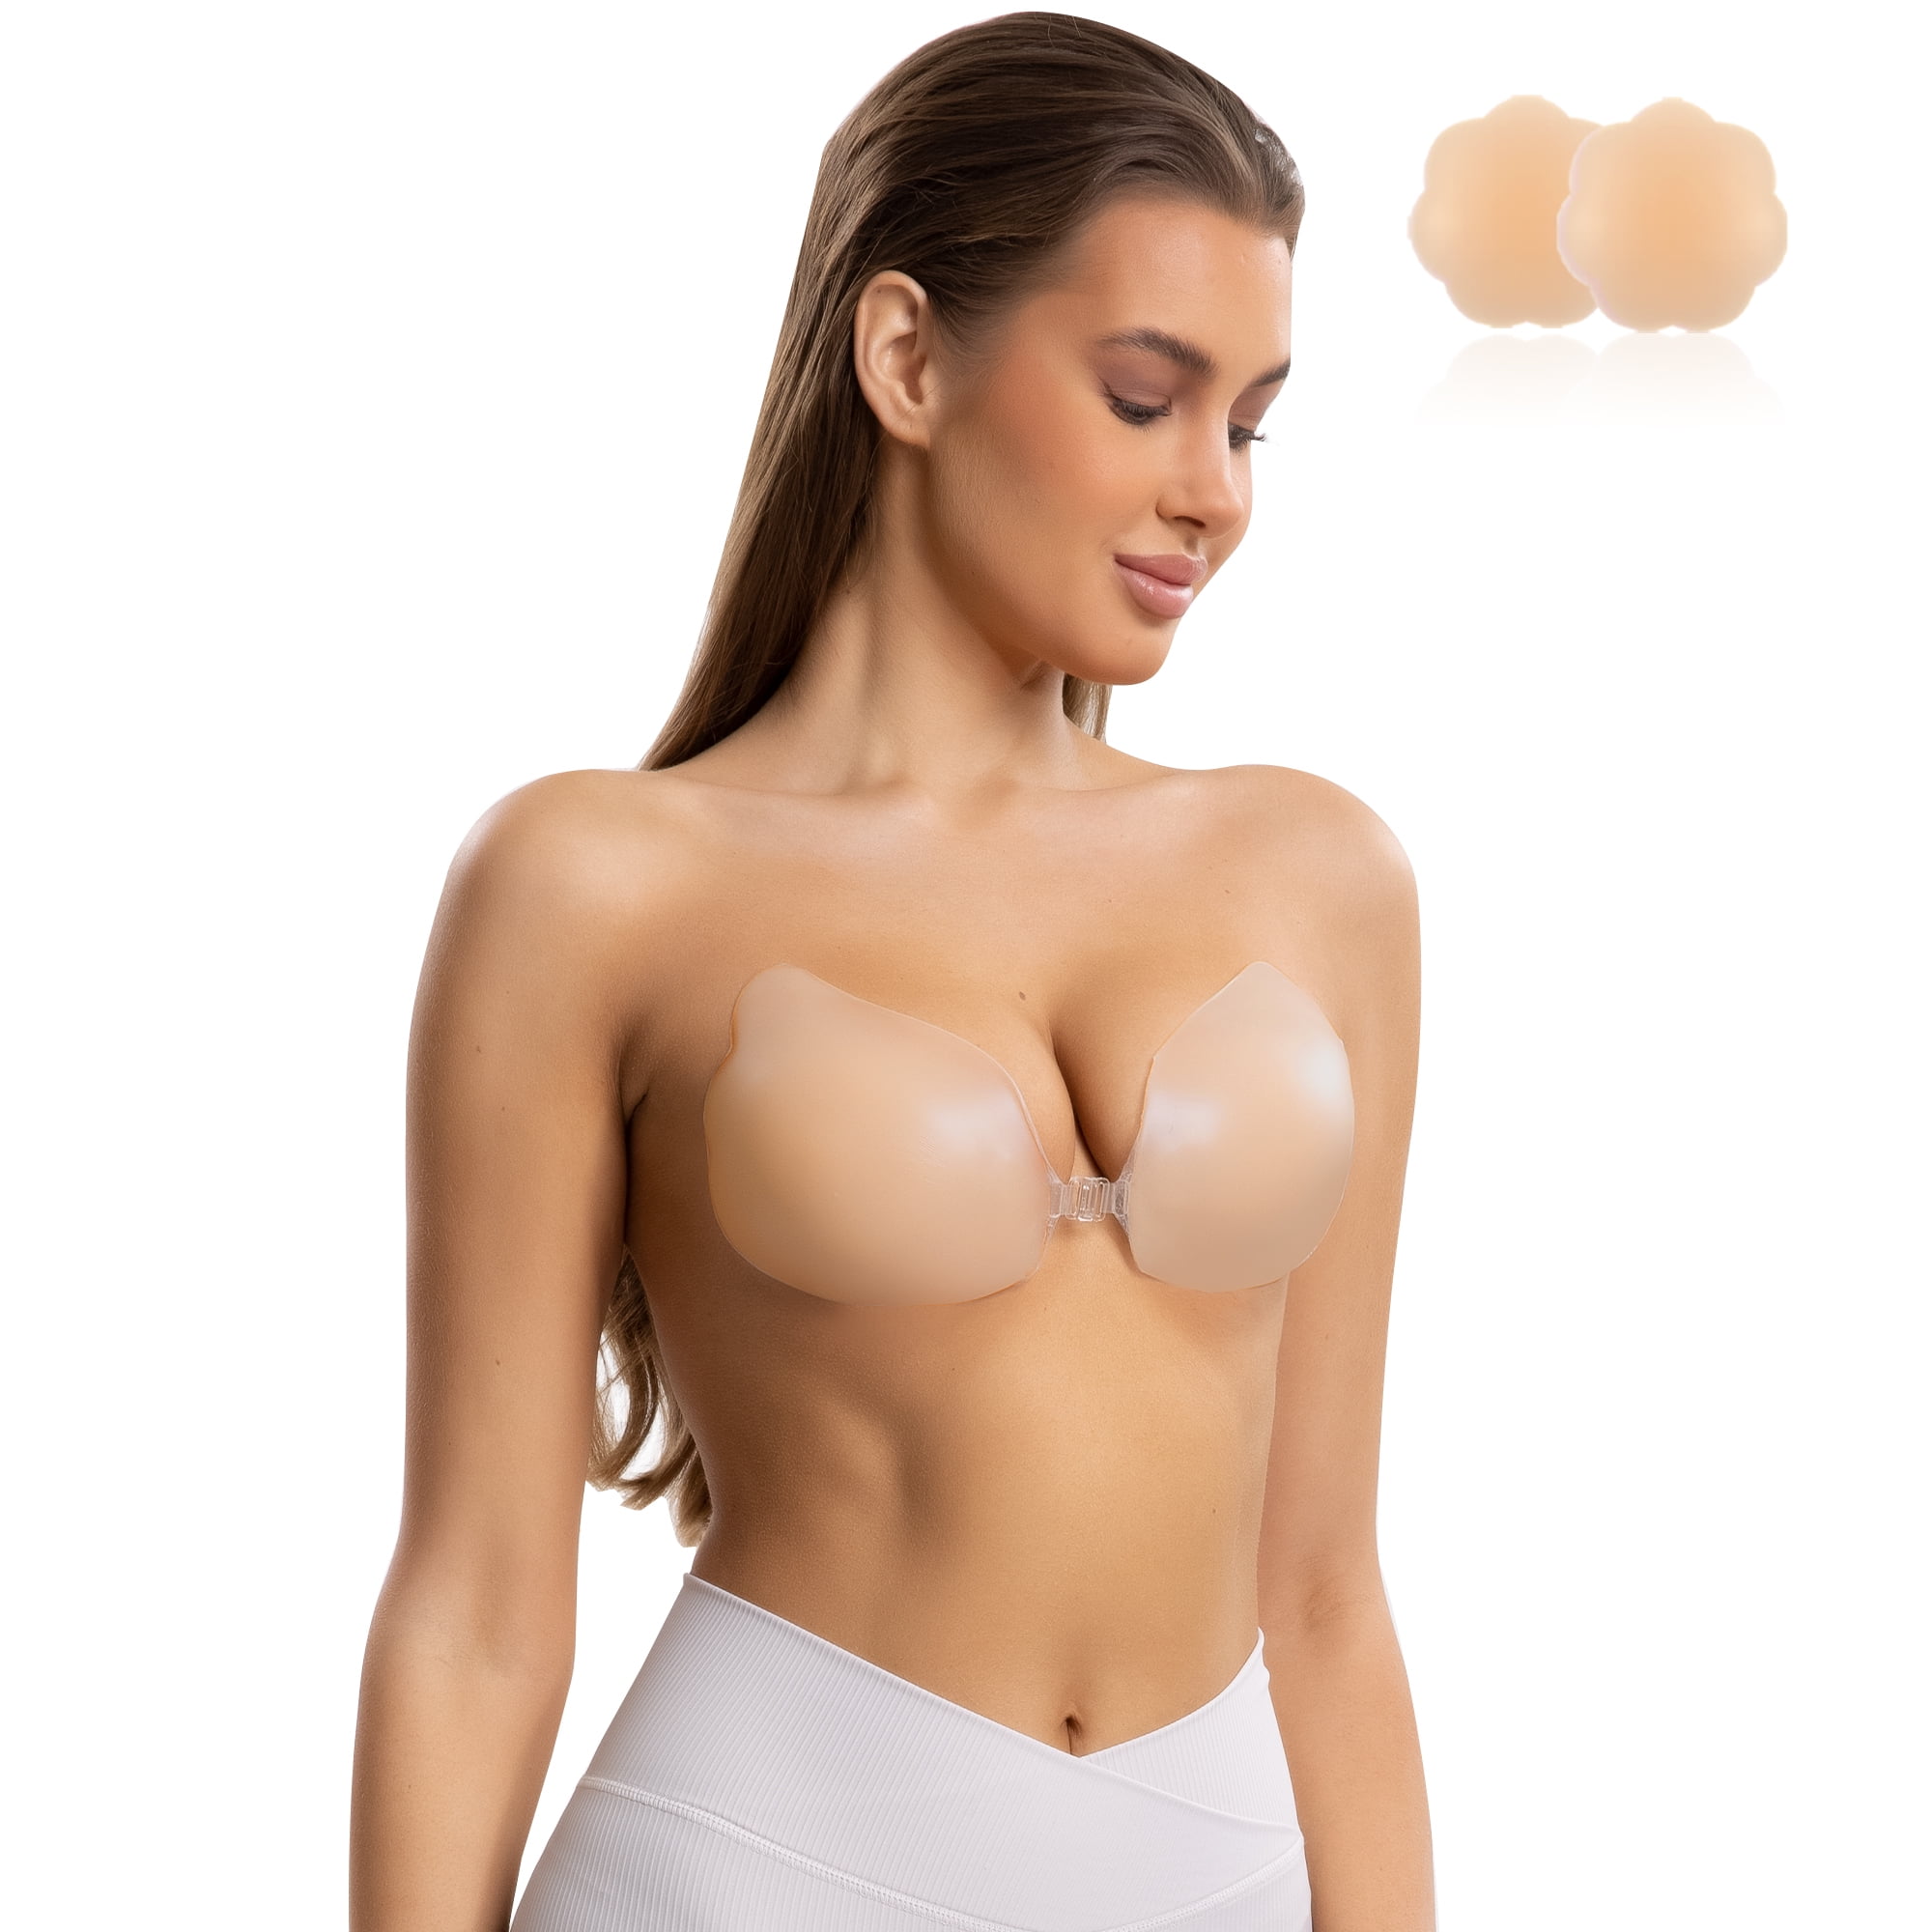 Niidor Women's Reusable Adhesive Backless Strapless Silicone Bra Nude with  Silicone Nipple Covers